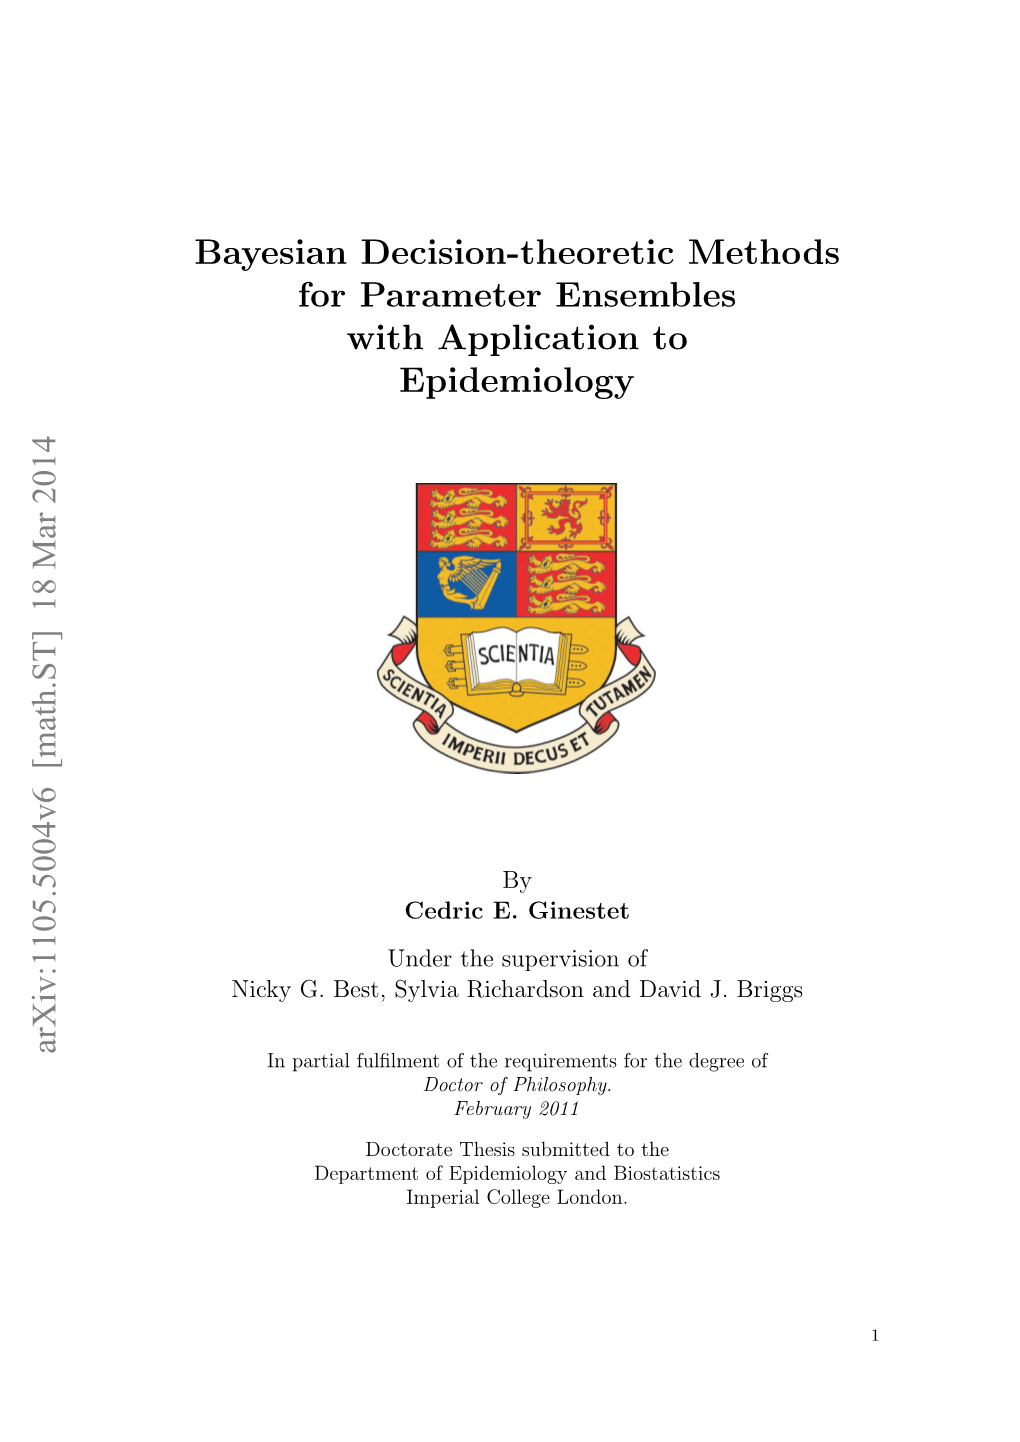 Bayesian Decision-Theoretic Methods for Parameter Ensembles with Application to Epidemiology